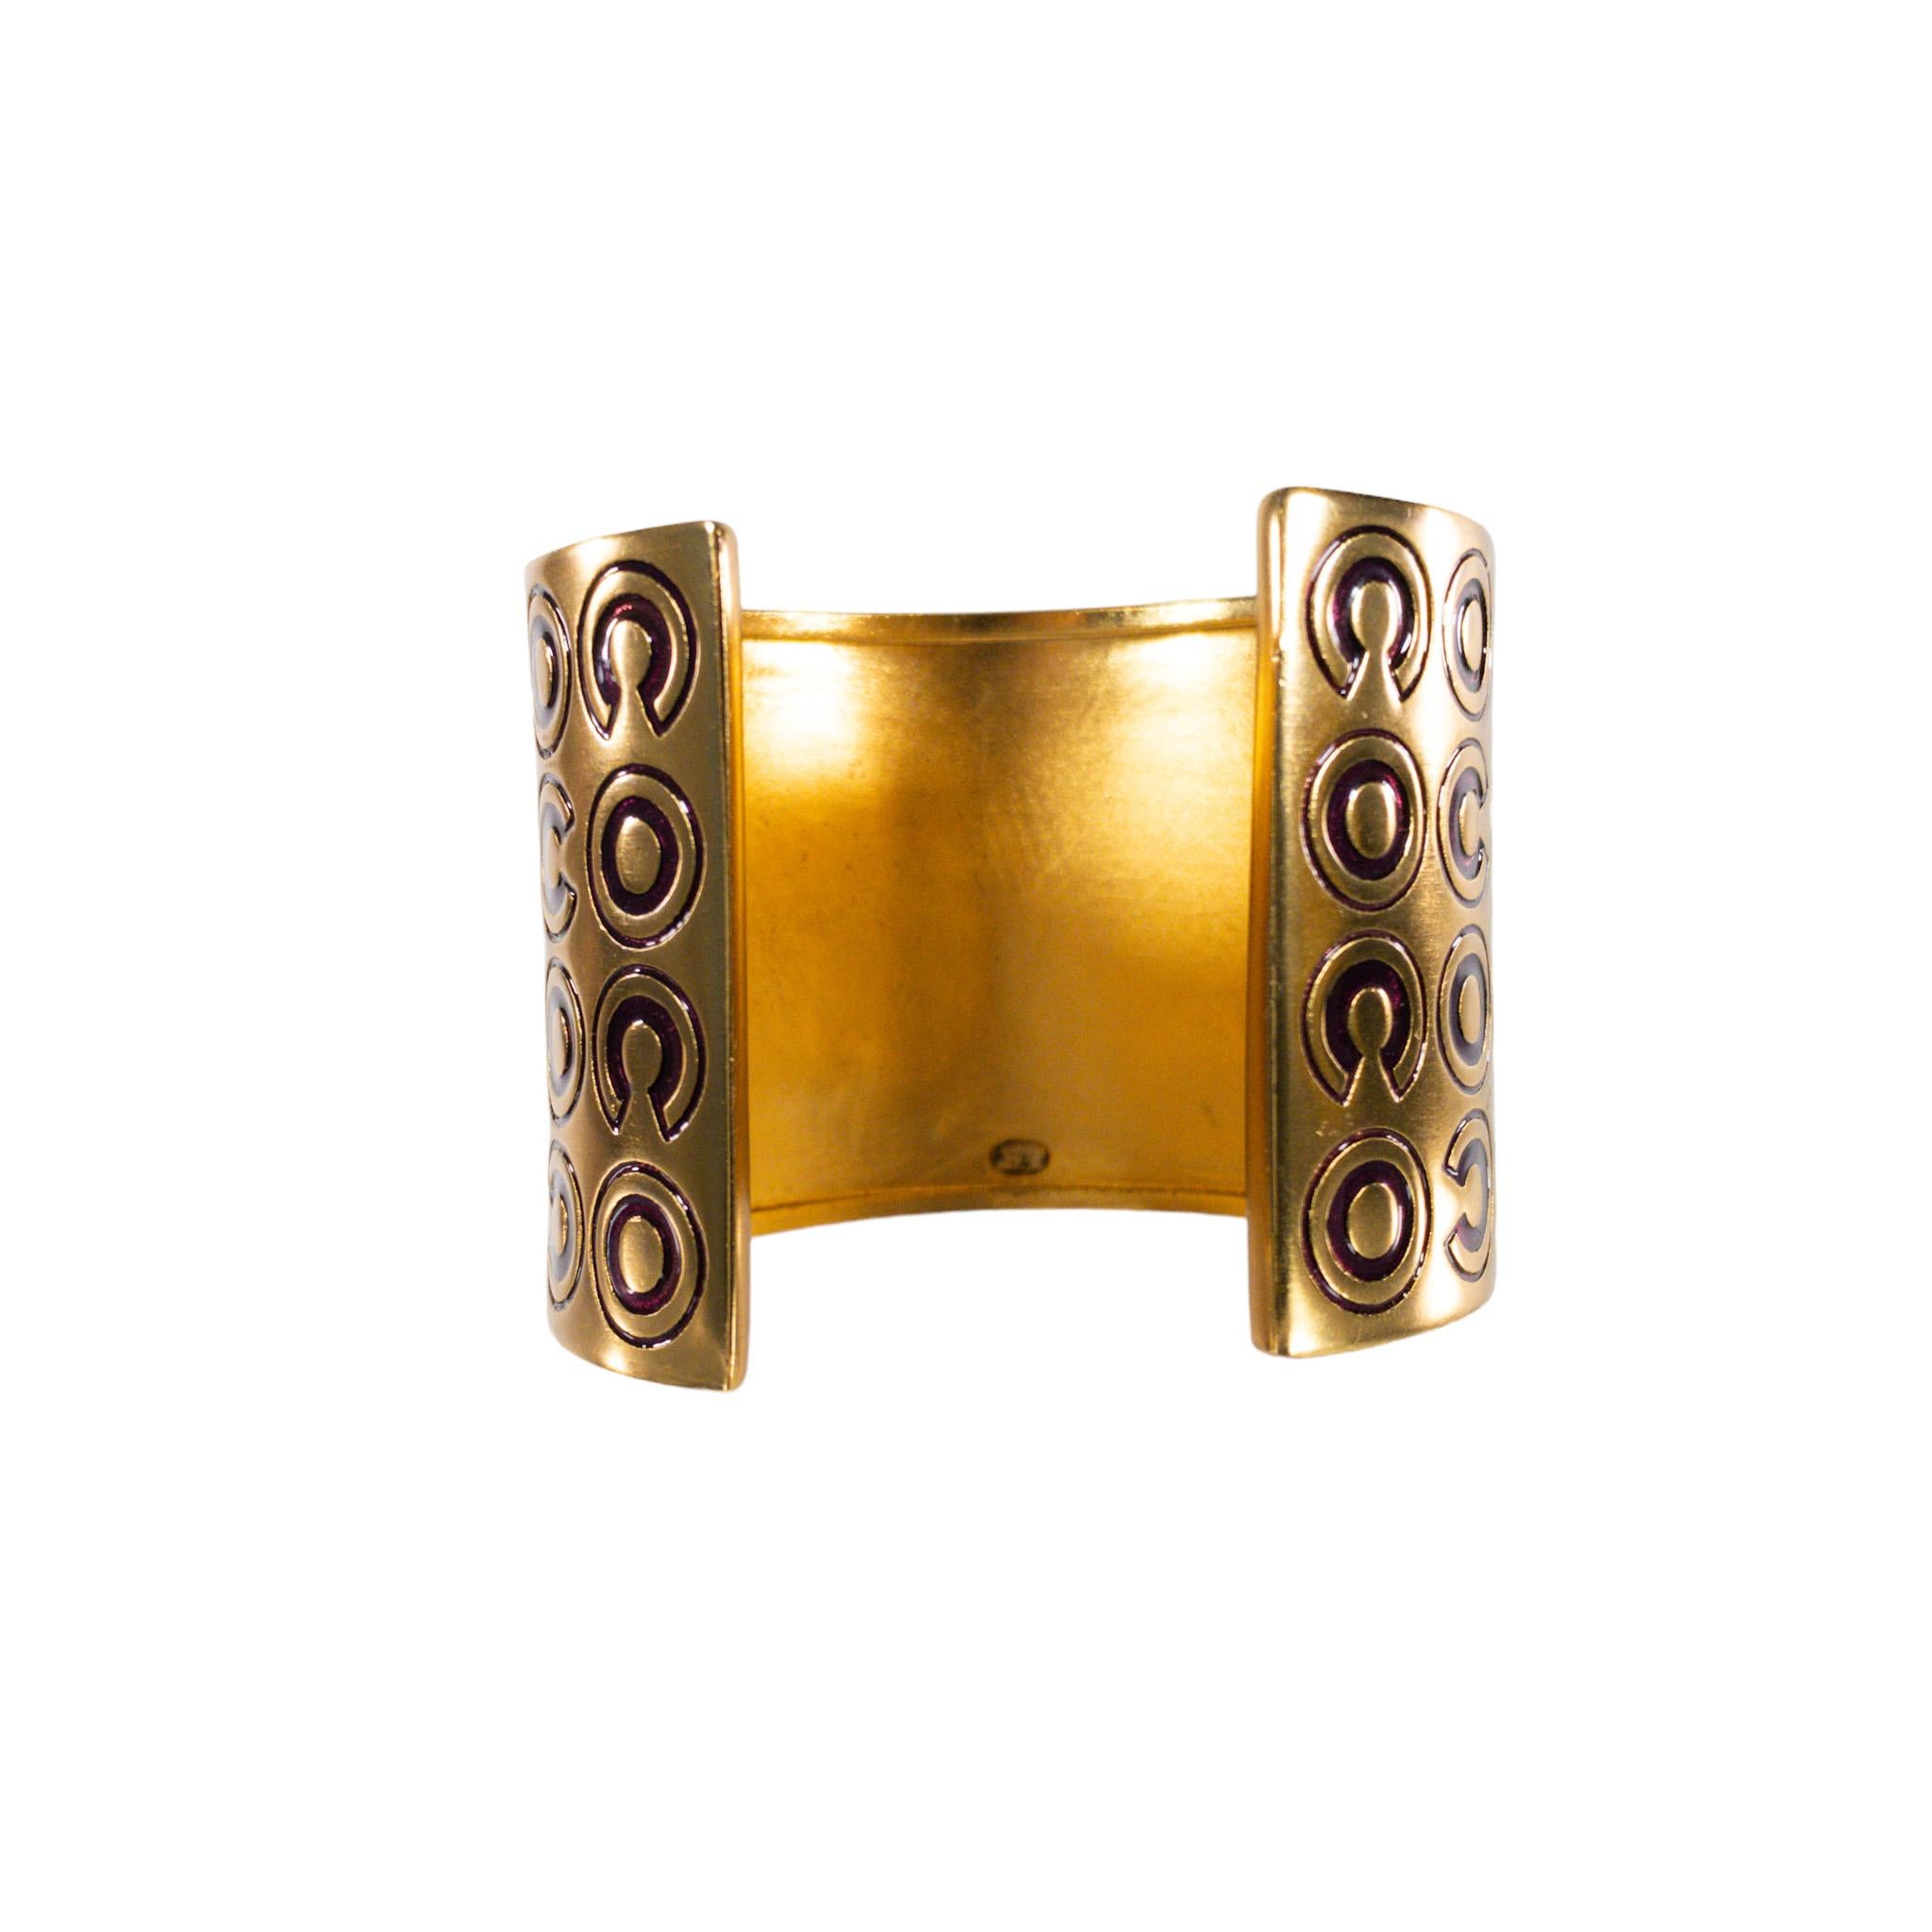 Chanel Gold / Burgundy Coco Cuff

This is an authentic Chanel gold wide cuff. Burgundy enamel Coco engraving through out.

Additional information:
Year: 2001
Size: M/L 7